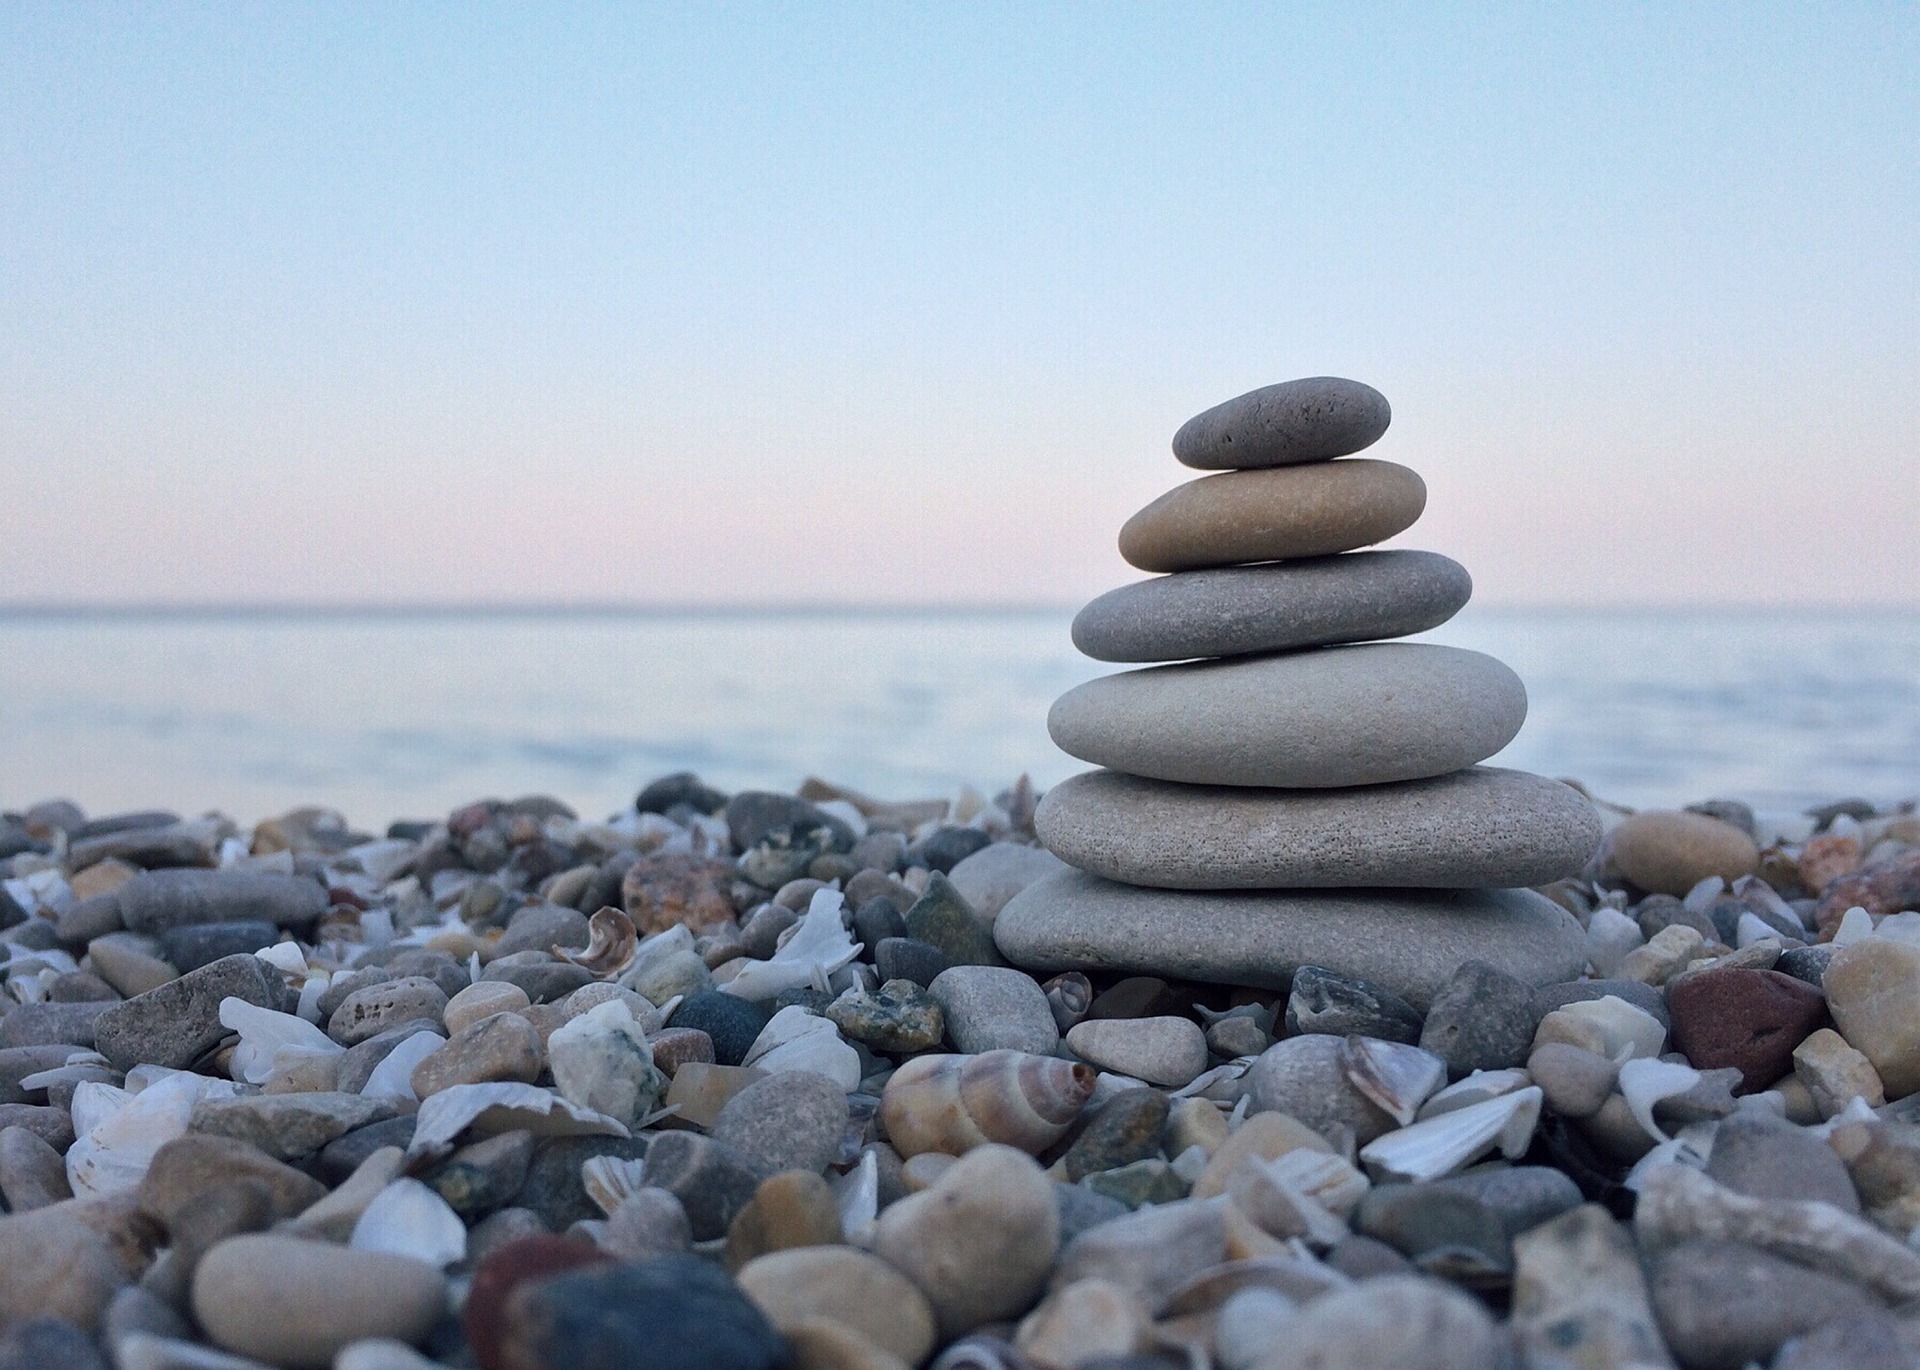 Harmony stones symbolizing peaceful resolution through separation agreements, a service offered by our Maryland divorce lawyer